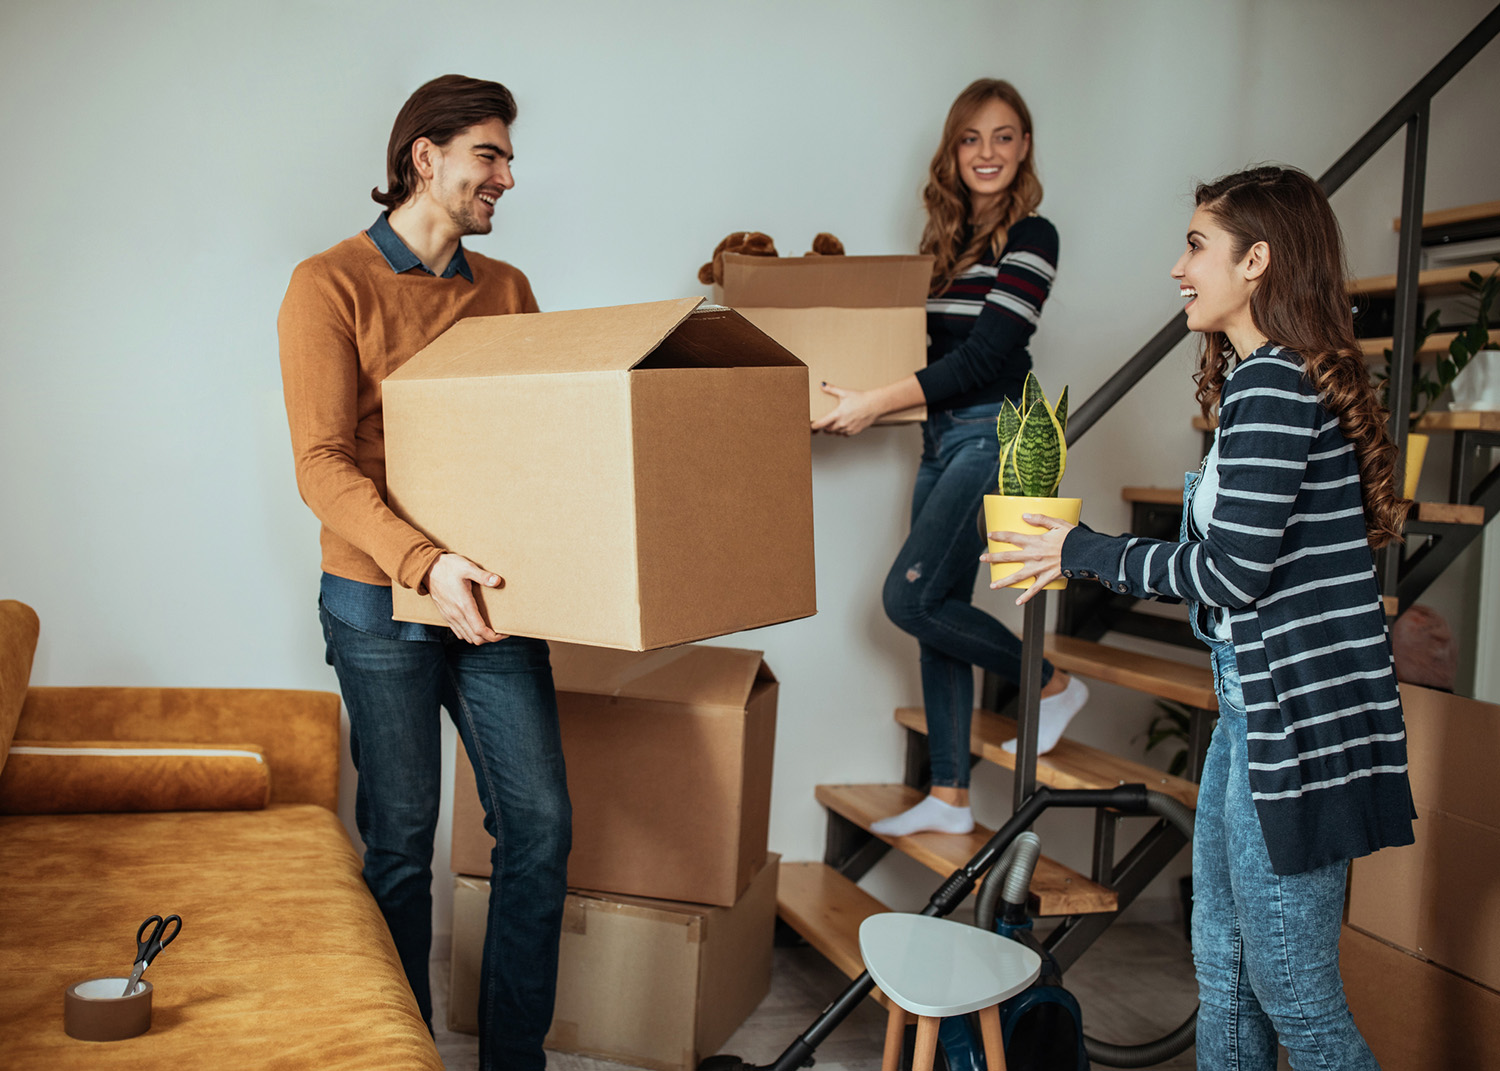 Group of friends packing up boxes for moving into new apartment